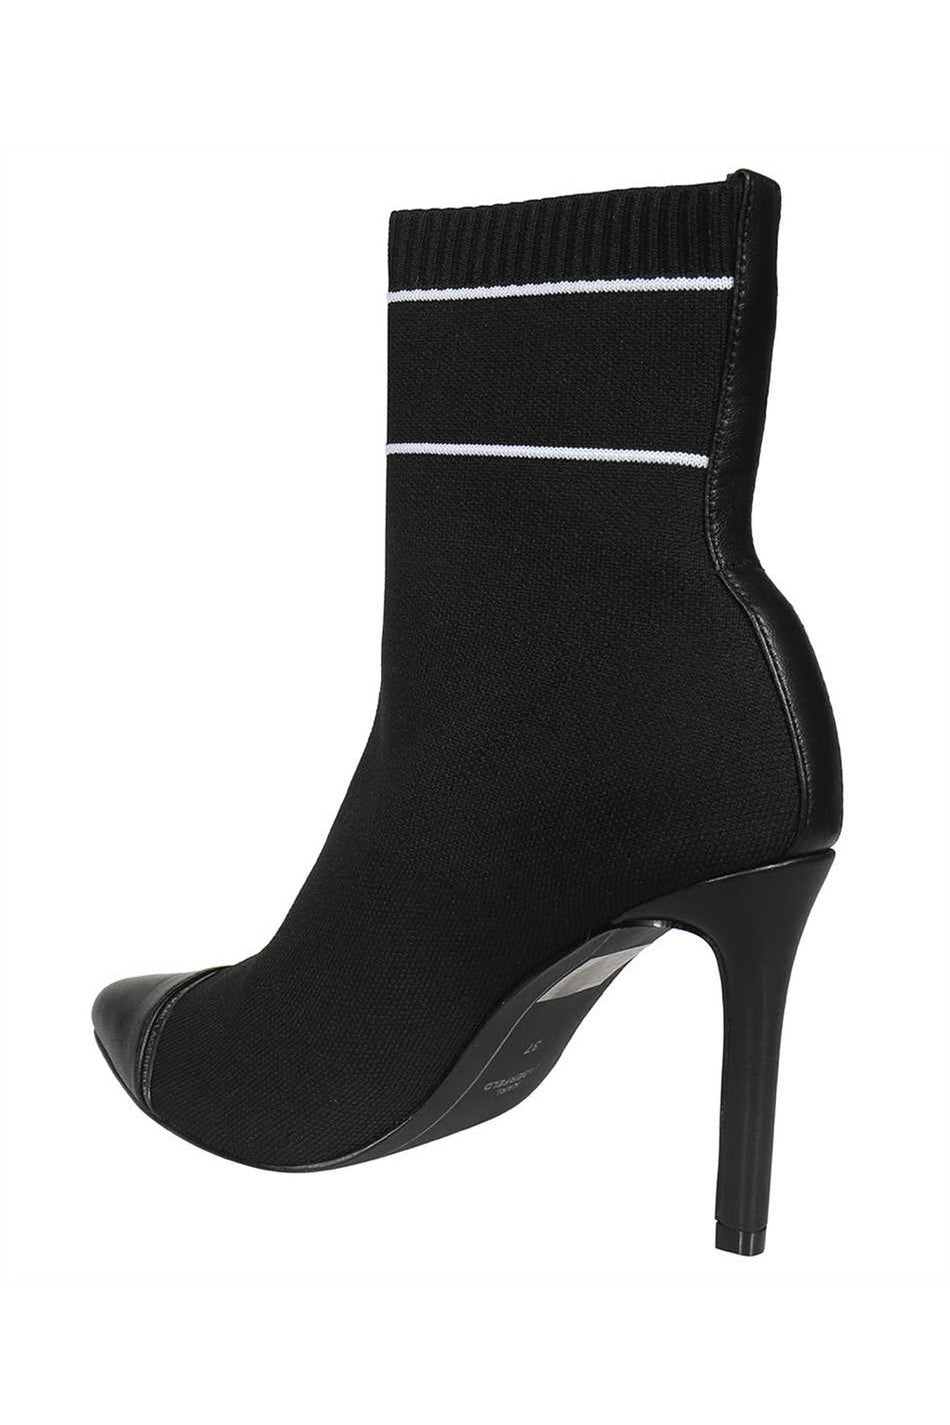 Sock ankle boots-Karl Lagerfeld-OUTLET-SALE-ARCHIVIST